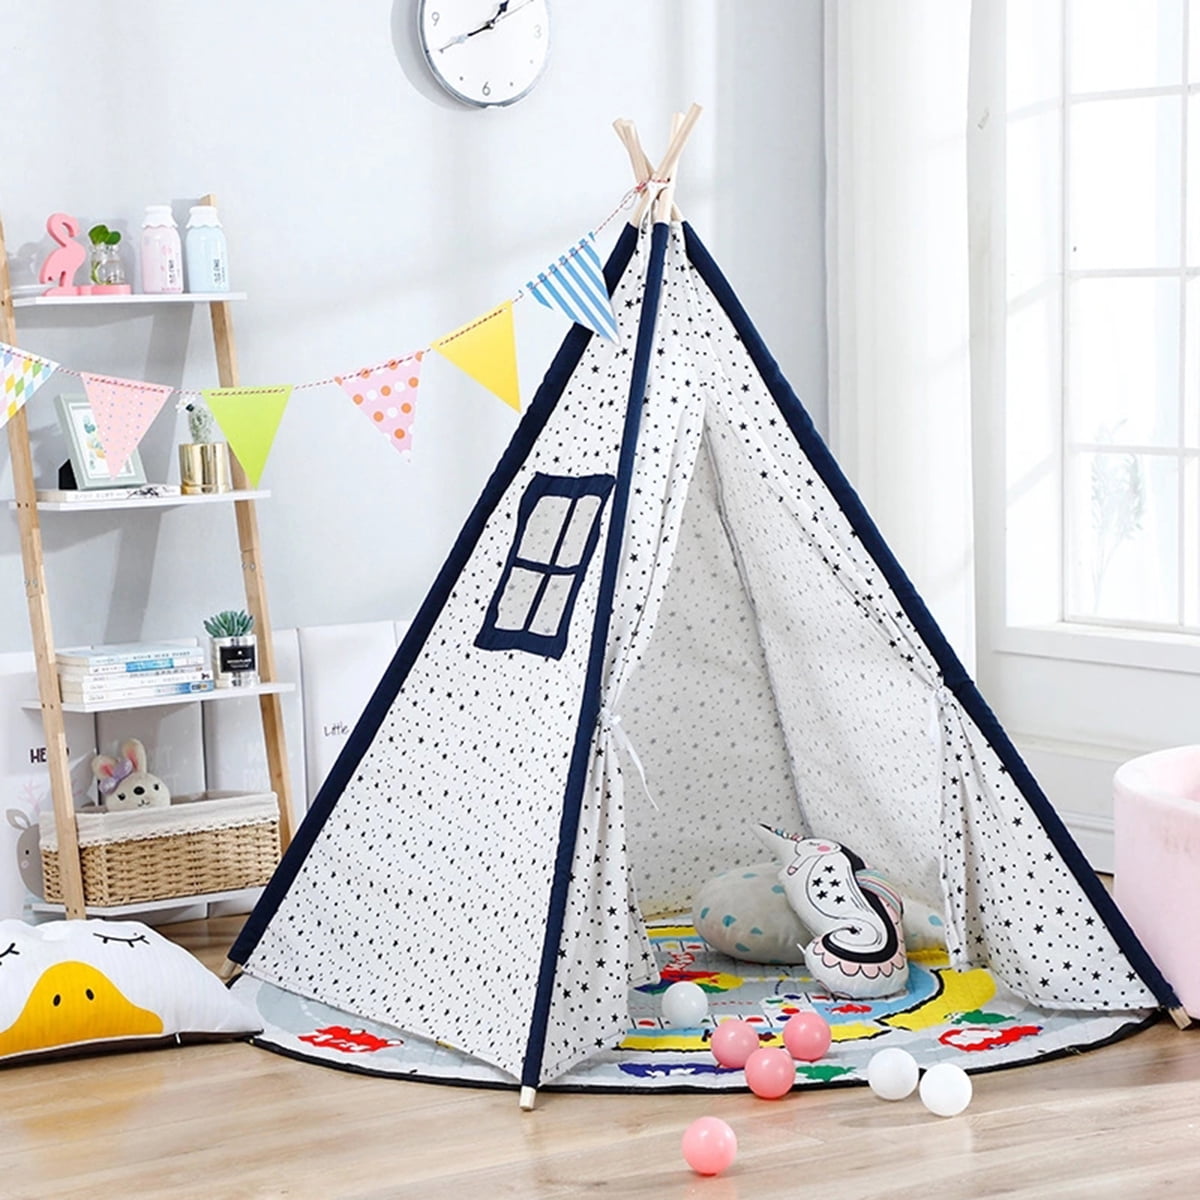 Teepee Tent for Kids Foldable Kids Play Tent for Girl and Boy with Carry Case & Bunting Room Decor Indoor & Outdoor Cotton Canvas Teepee 